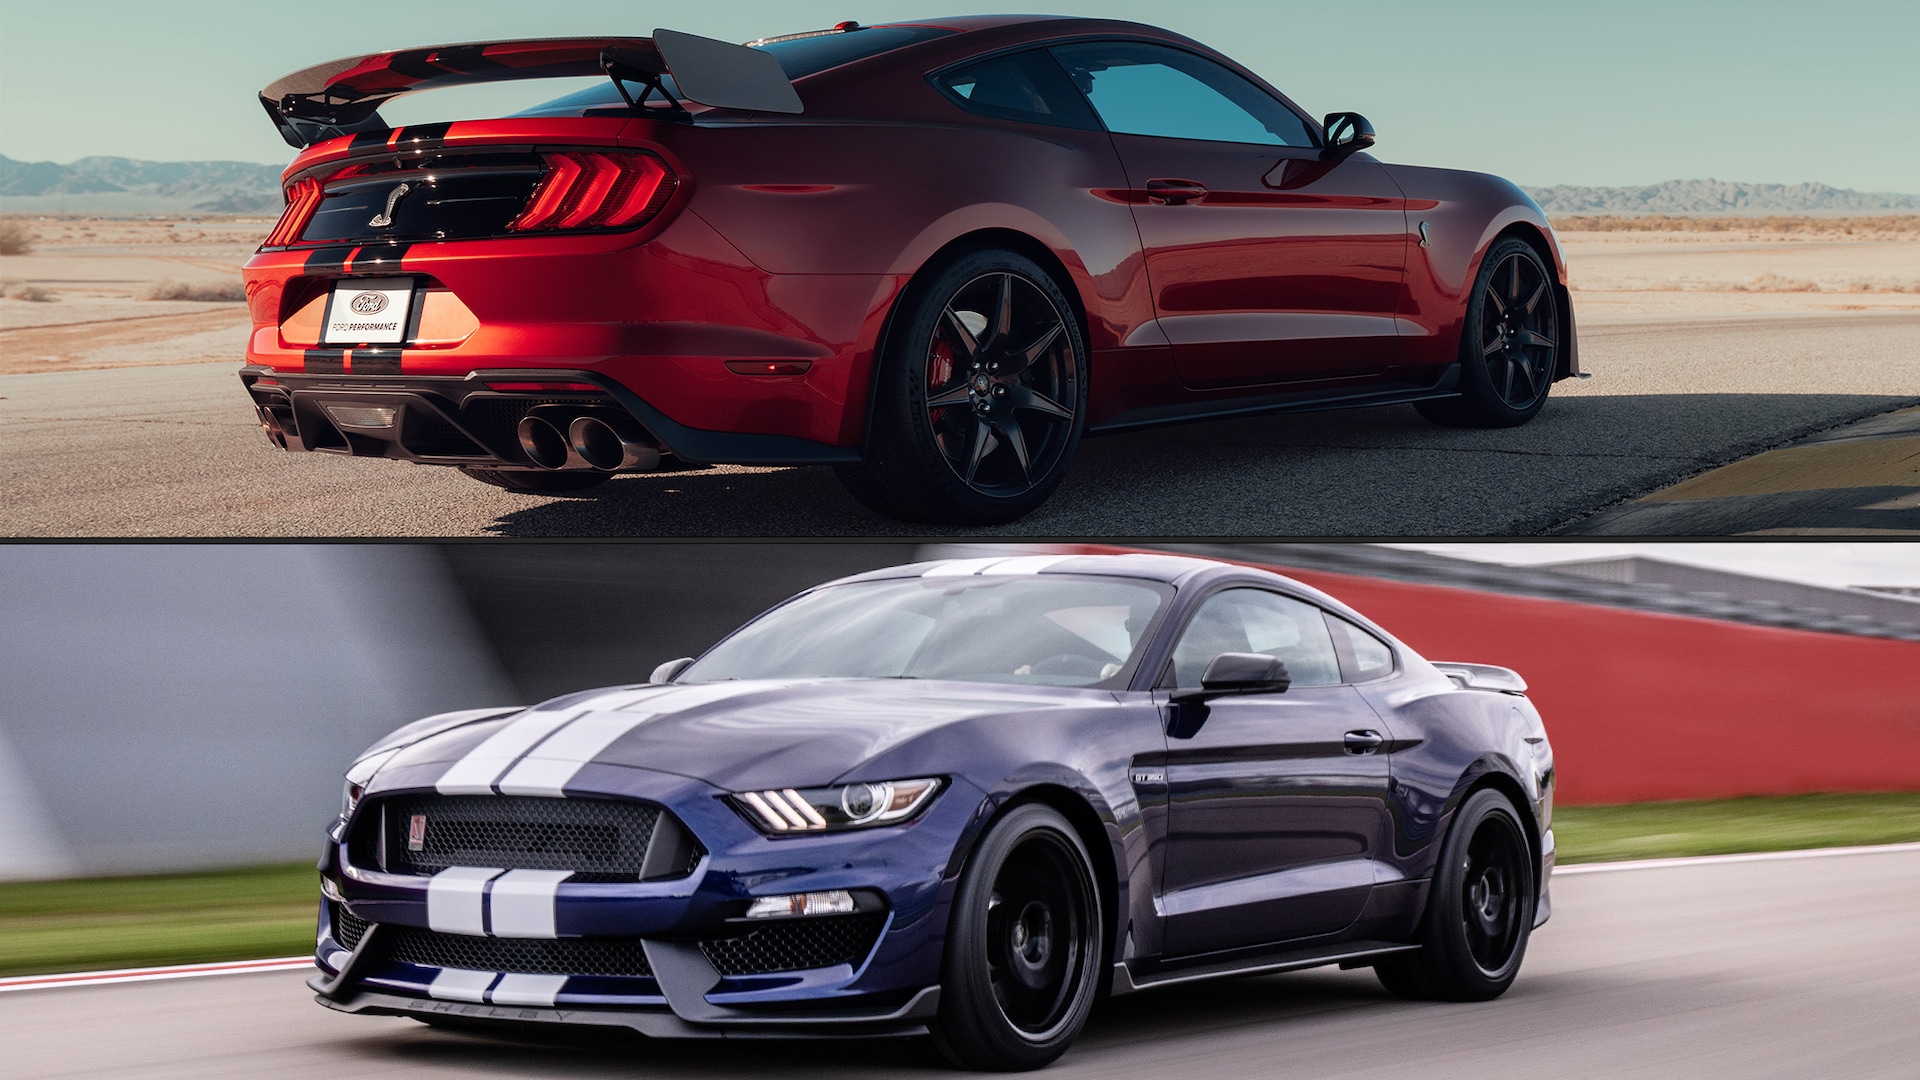 2020 Ford Shelby Mustang GT500 vs. GT350: How They're Different